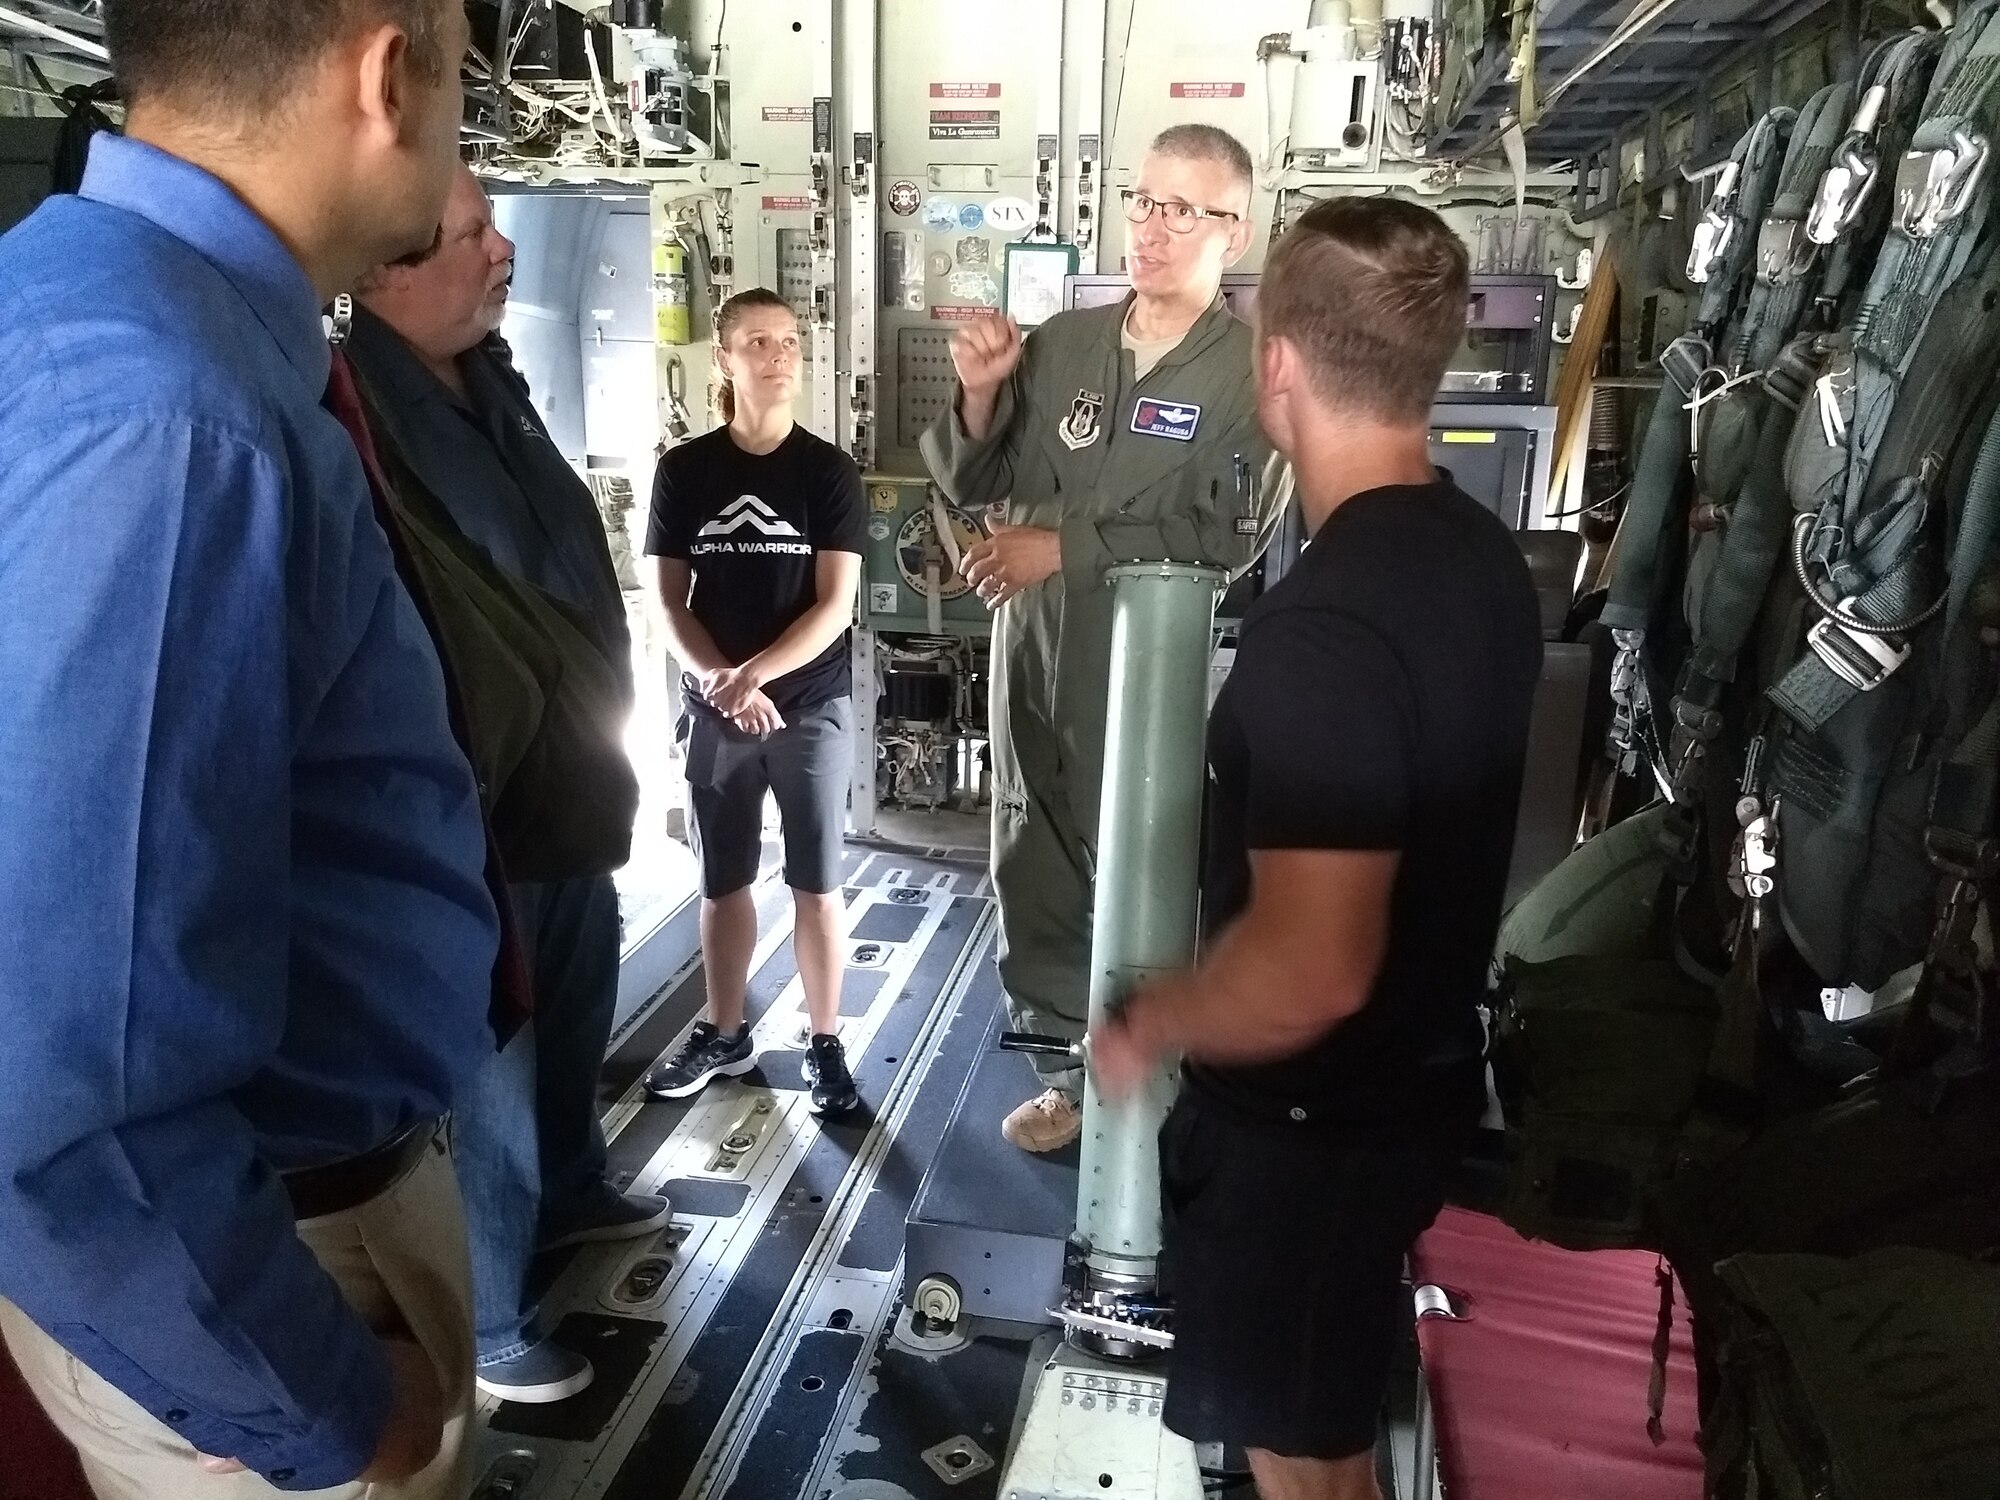 Kevin Klein and Sara Heesen, American Ninja Warriors, were briefed on the hurricane mission and toured a WC-130J of the 53rd Weather Reconnaissance Squadron, 403rd Wing, during the Alpha Warrior tour at Keesler Air Force Base, Mississippi Aug. 2, 2018. Alpha Warrior, built around a unique apparatus, challenges Airmen as they tackle the various obstacles or stations. This program is designed to enhance fitness training by helping Airmen build and maintain resiliency, while at home or deployed. (US. Air
Force photo by Master Sgt. Jessica Kendziorek)